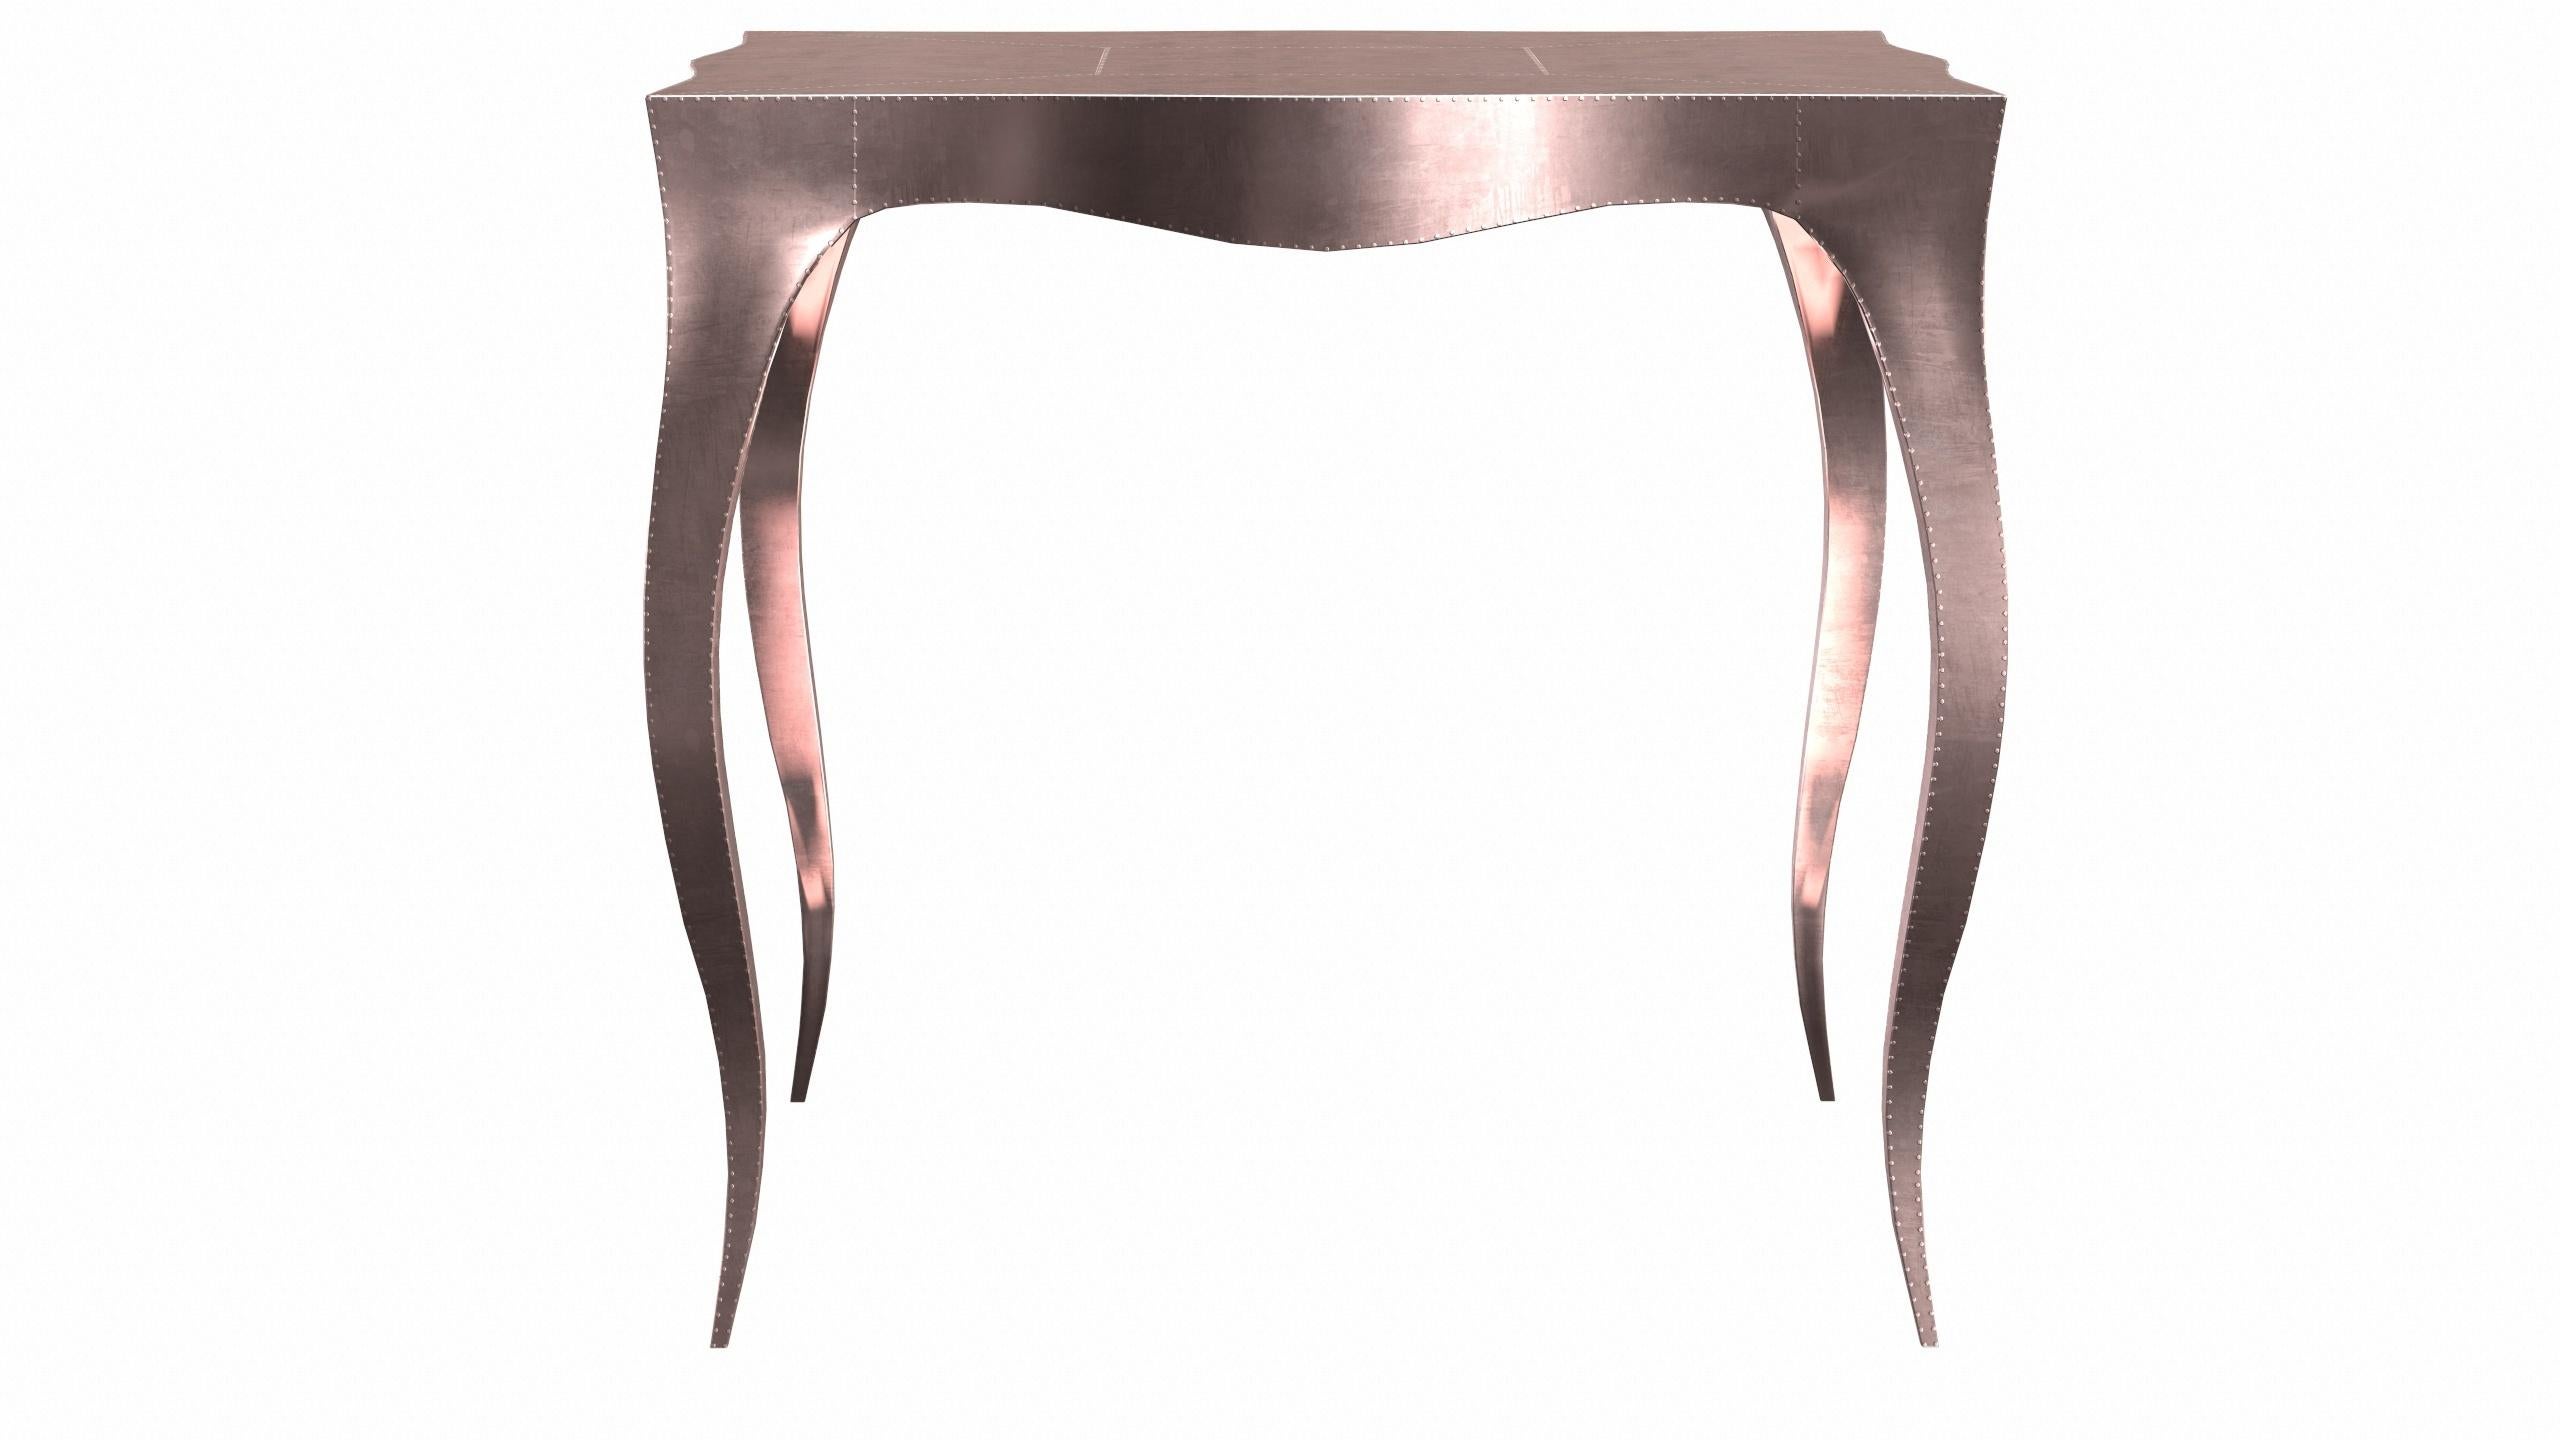 American Louise Art Deco Coffee and Cocktail Tables Smooth Copper by Paul Mathieu For Sale